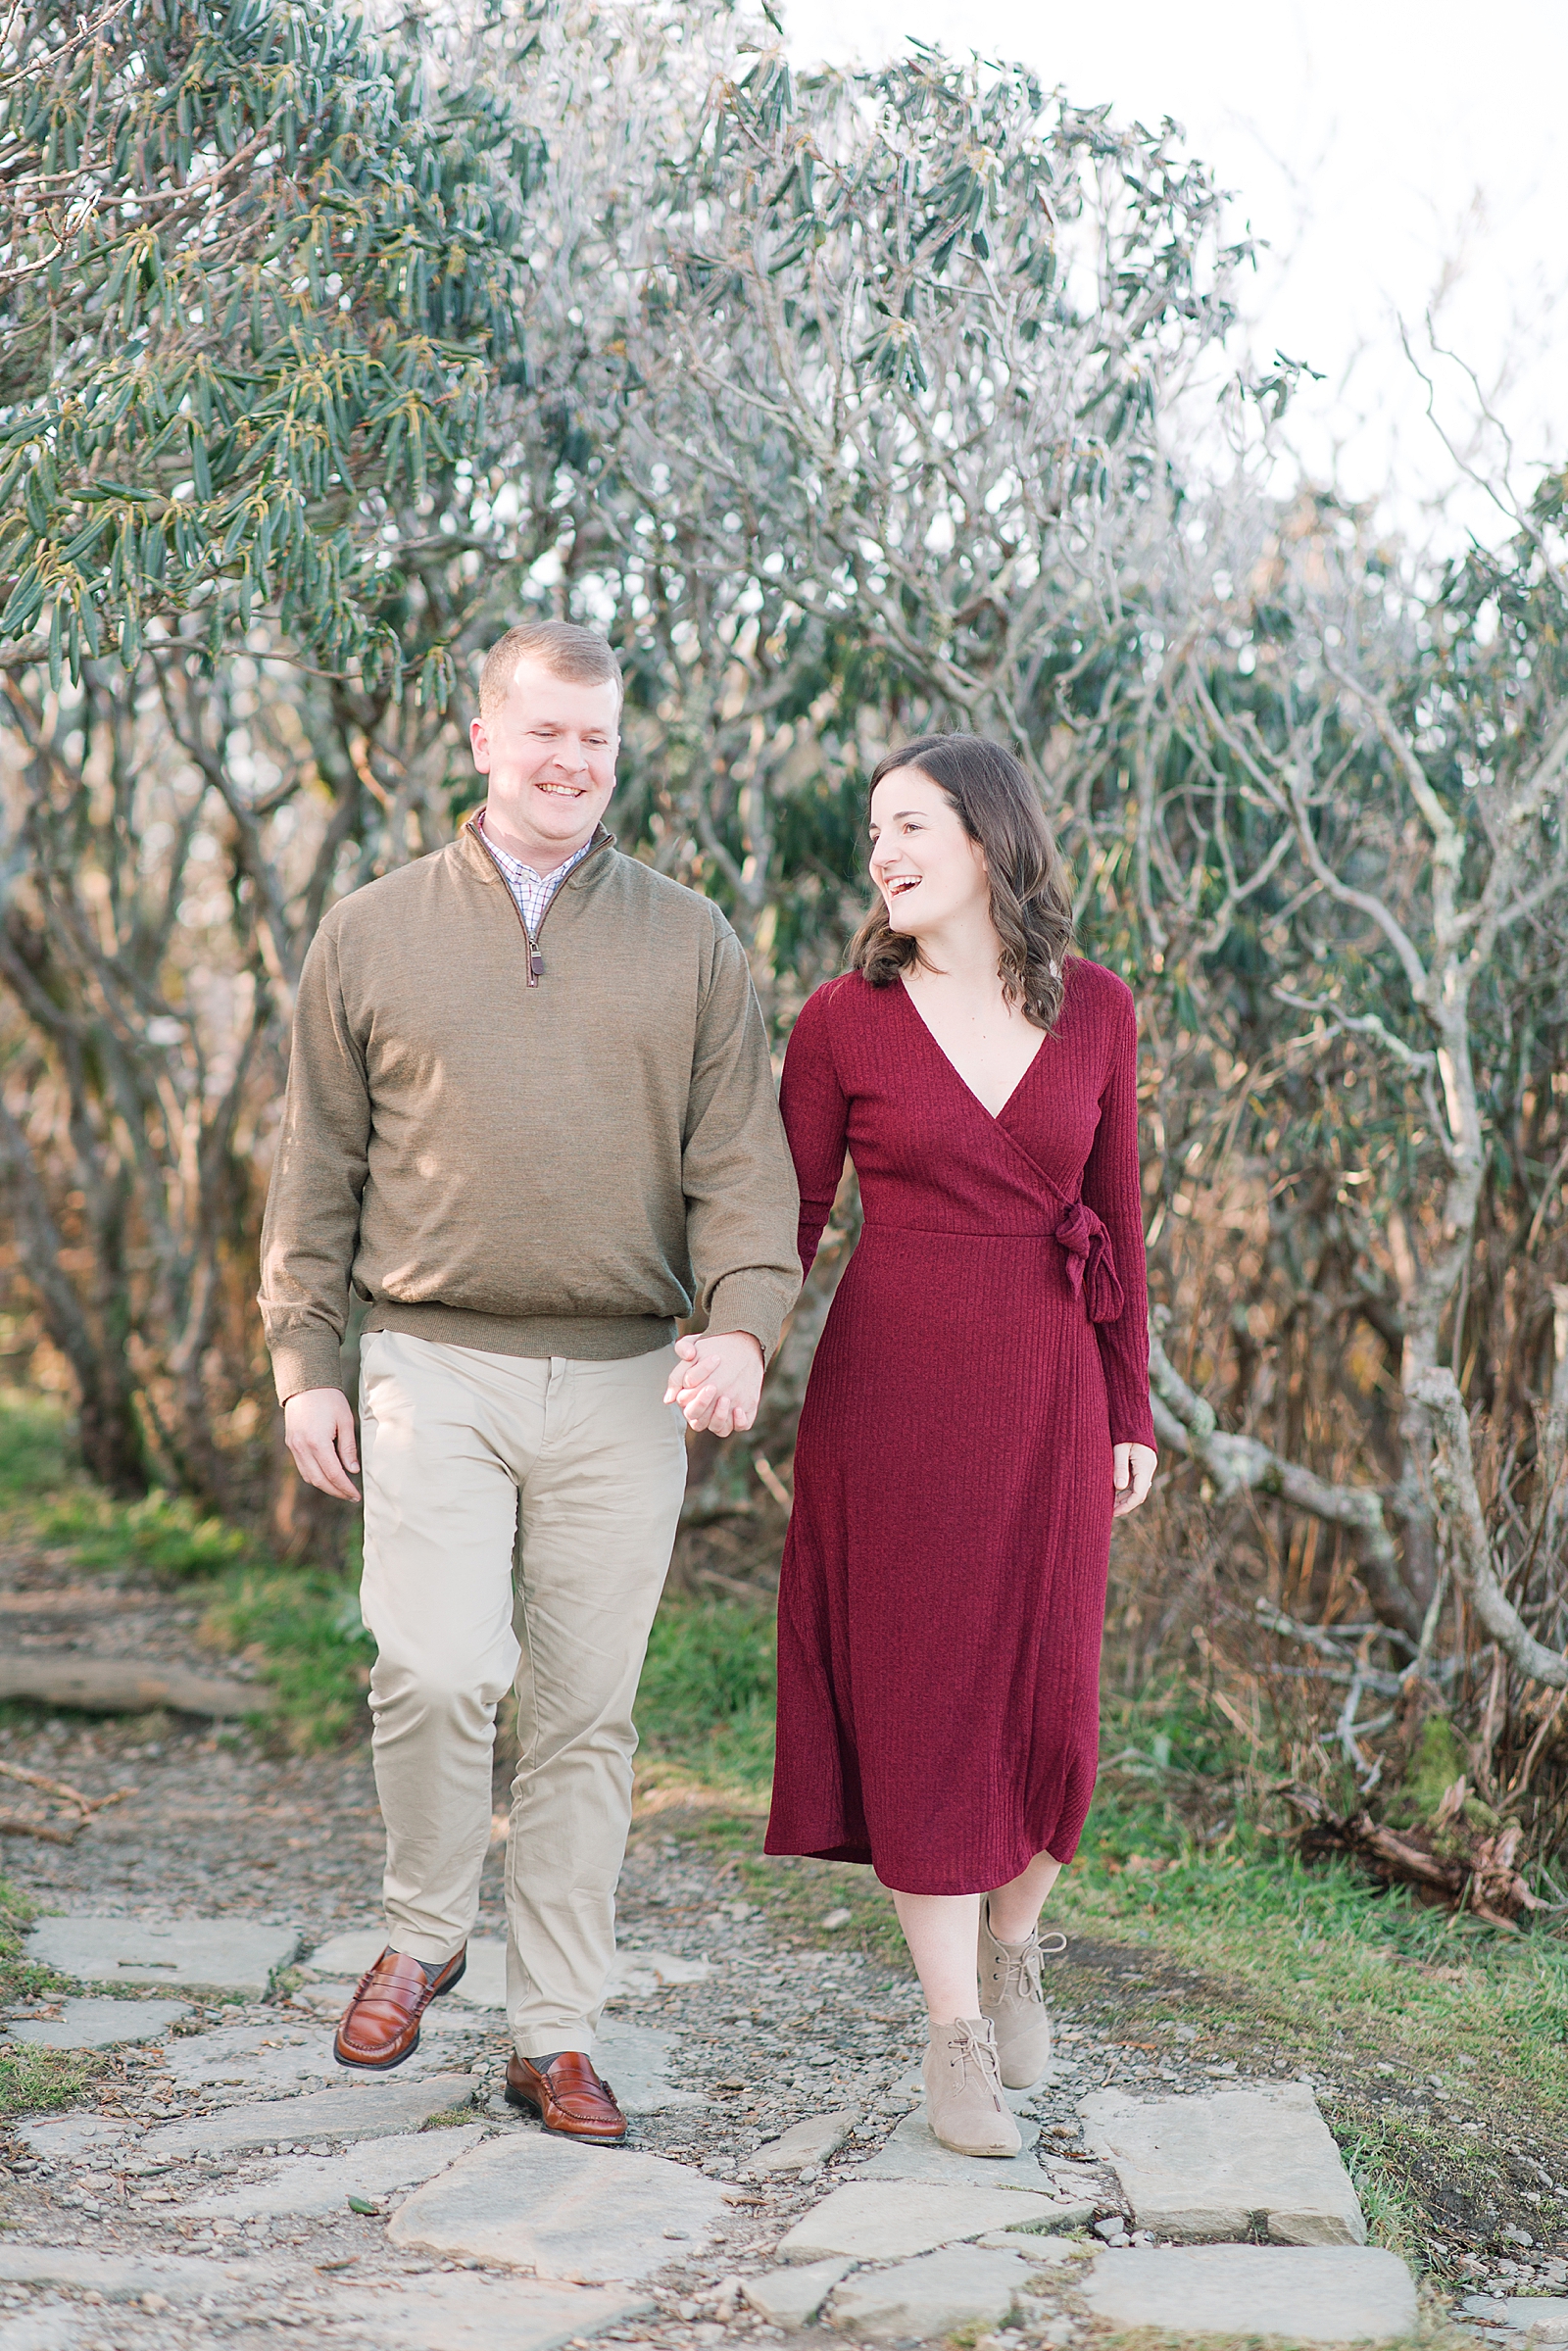 Craggy Gardens Trail Engagement Session Couple Walking and Laughing Photo